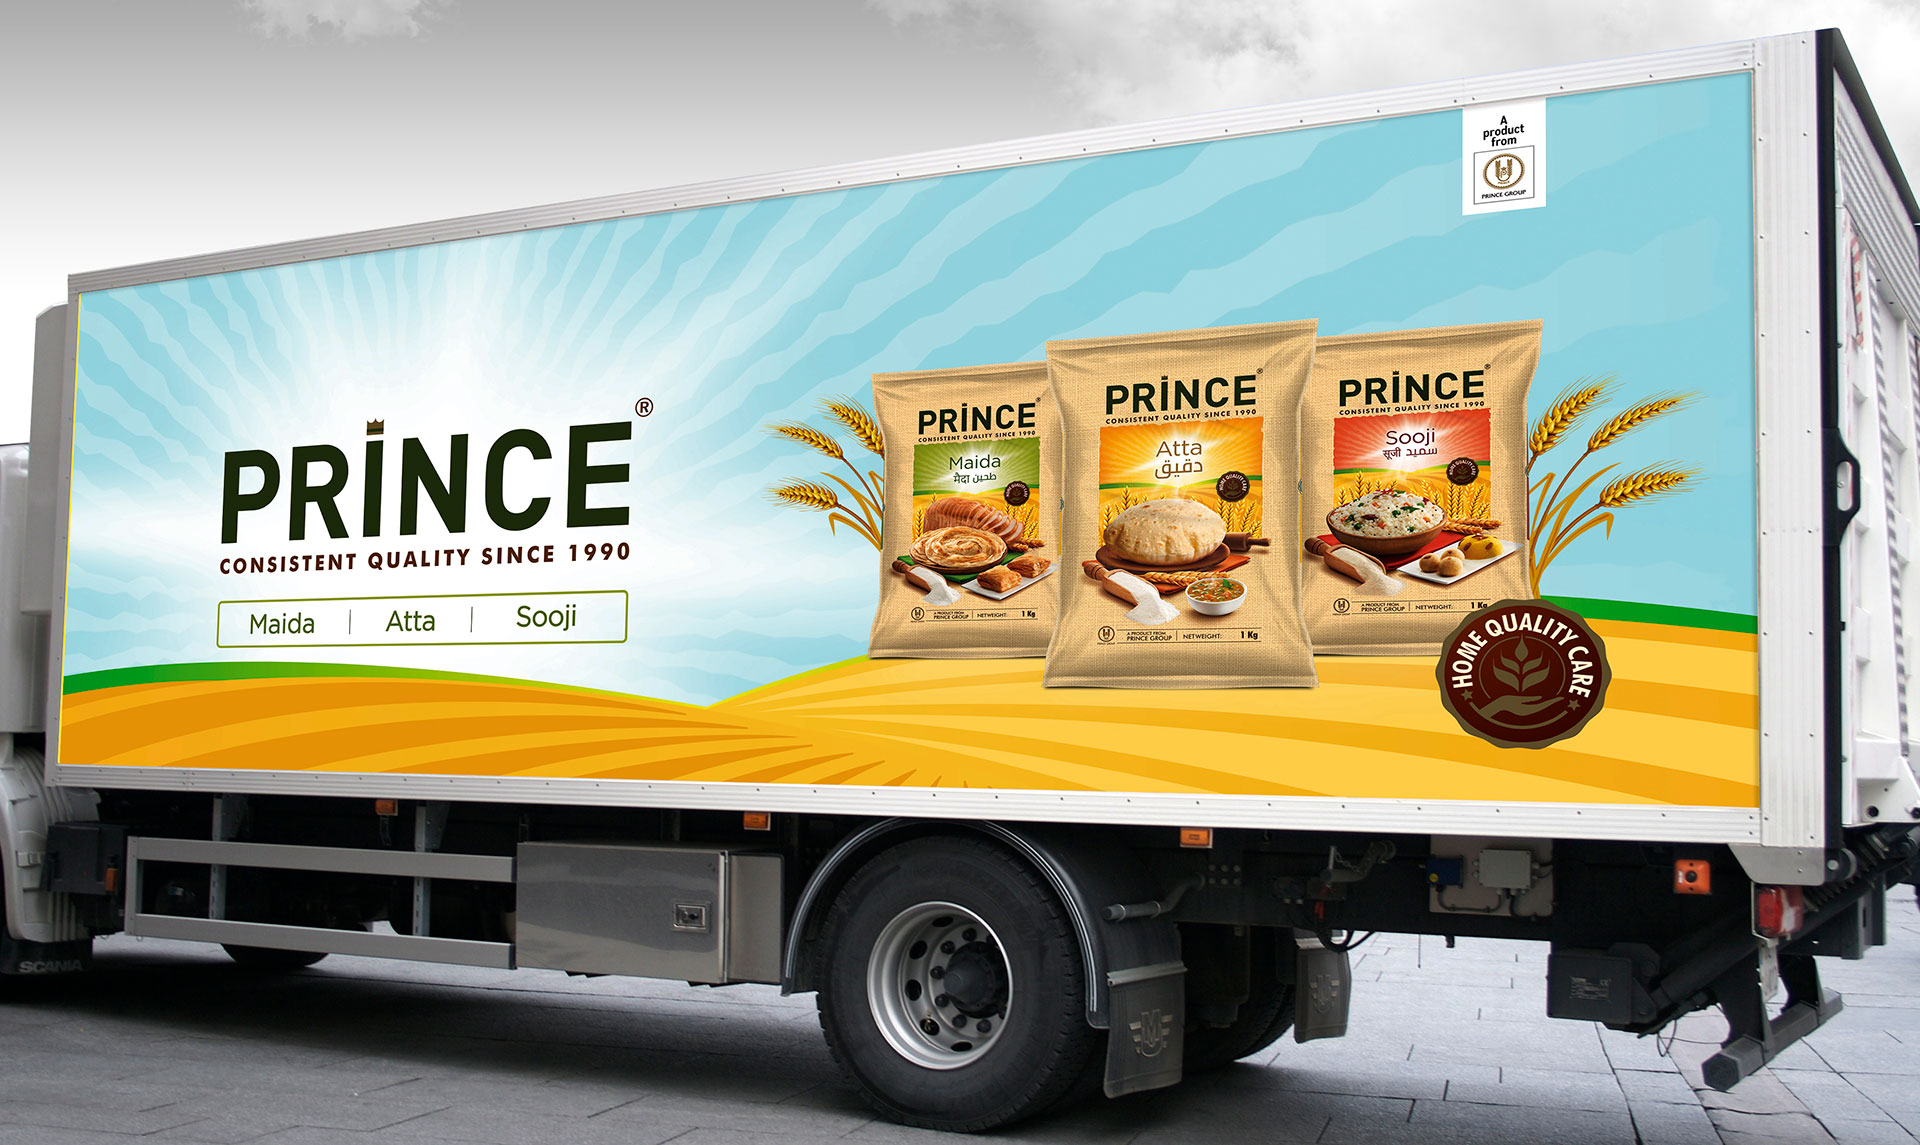 A truck of Prince Maida, Atta, Sooji with vechile graphics design on the side